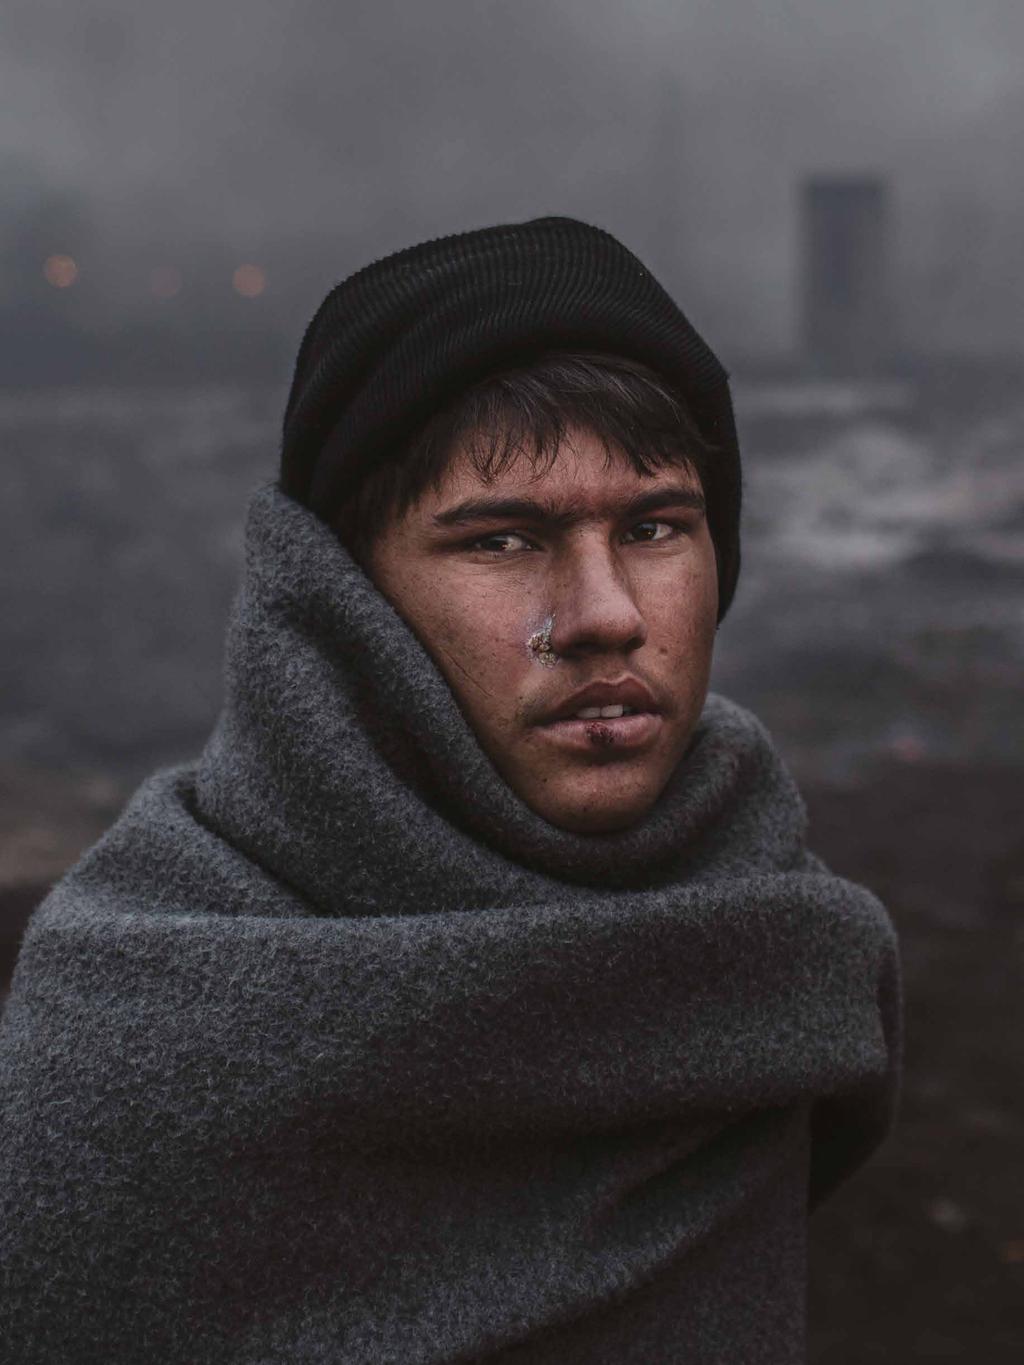 Asylum-seekers Serbia. Refugees trapped in transit. Hazrat, a 16-year old Afghan refugee, struggles to keep warm in freezing conditions in Belgrade.